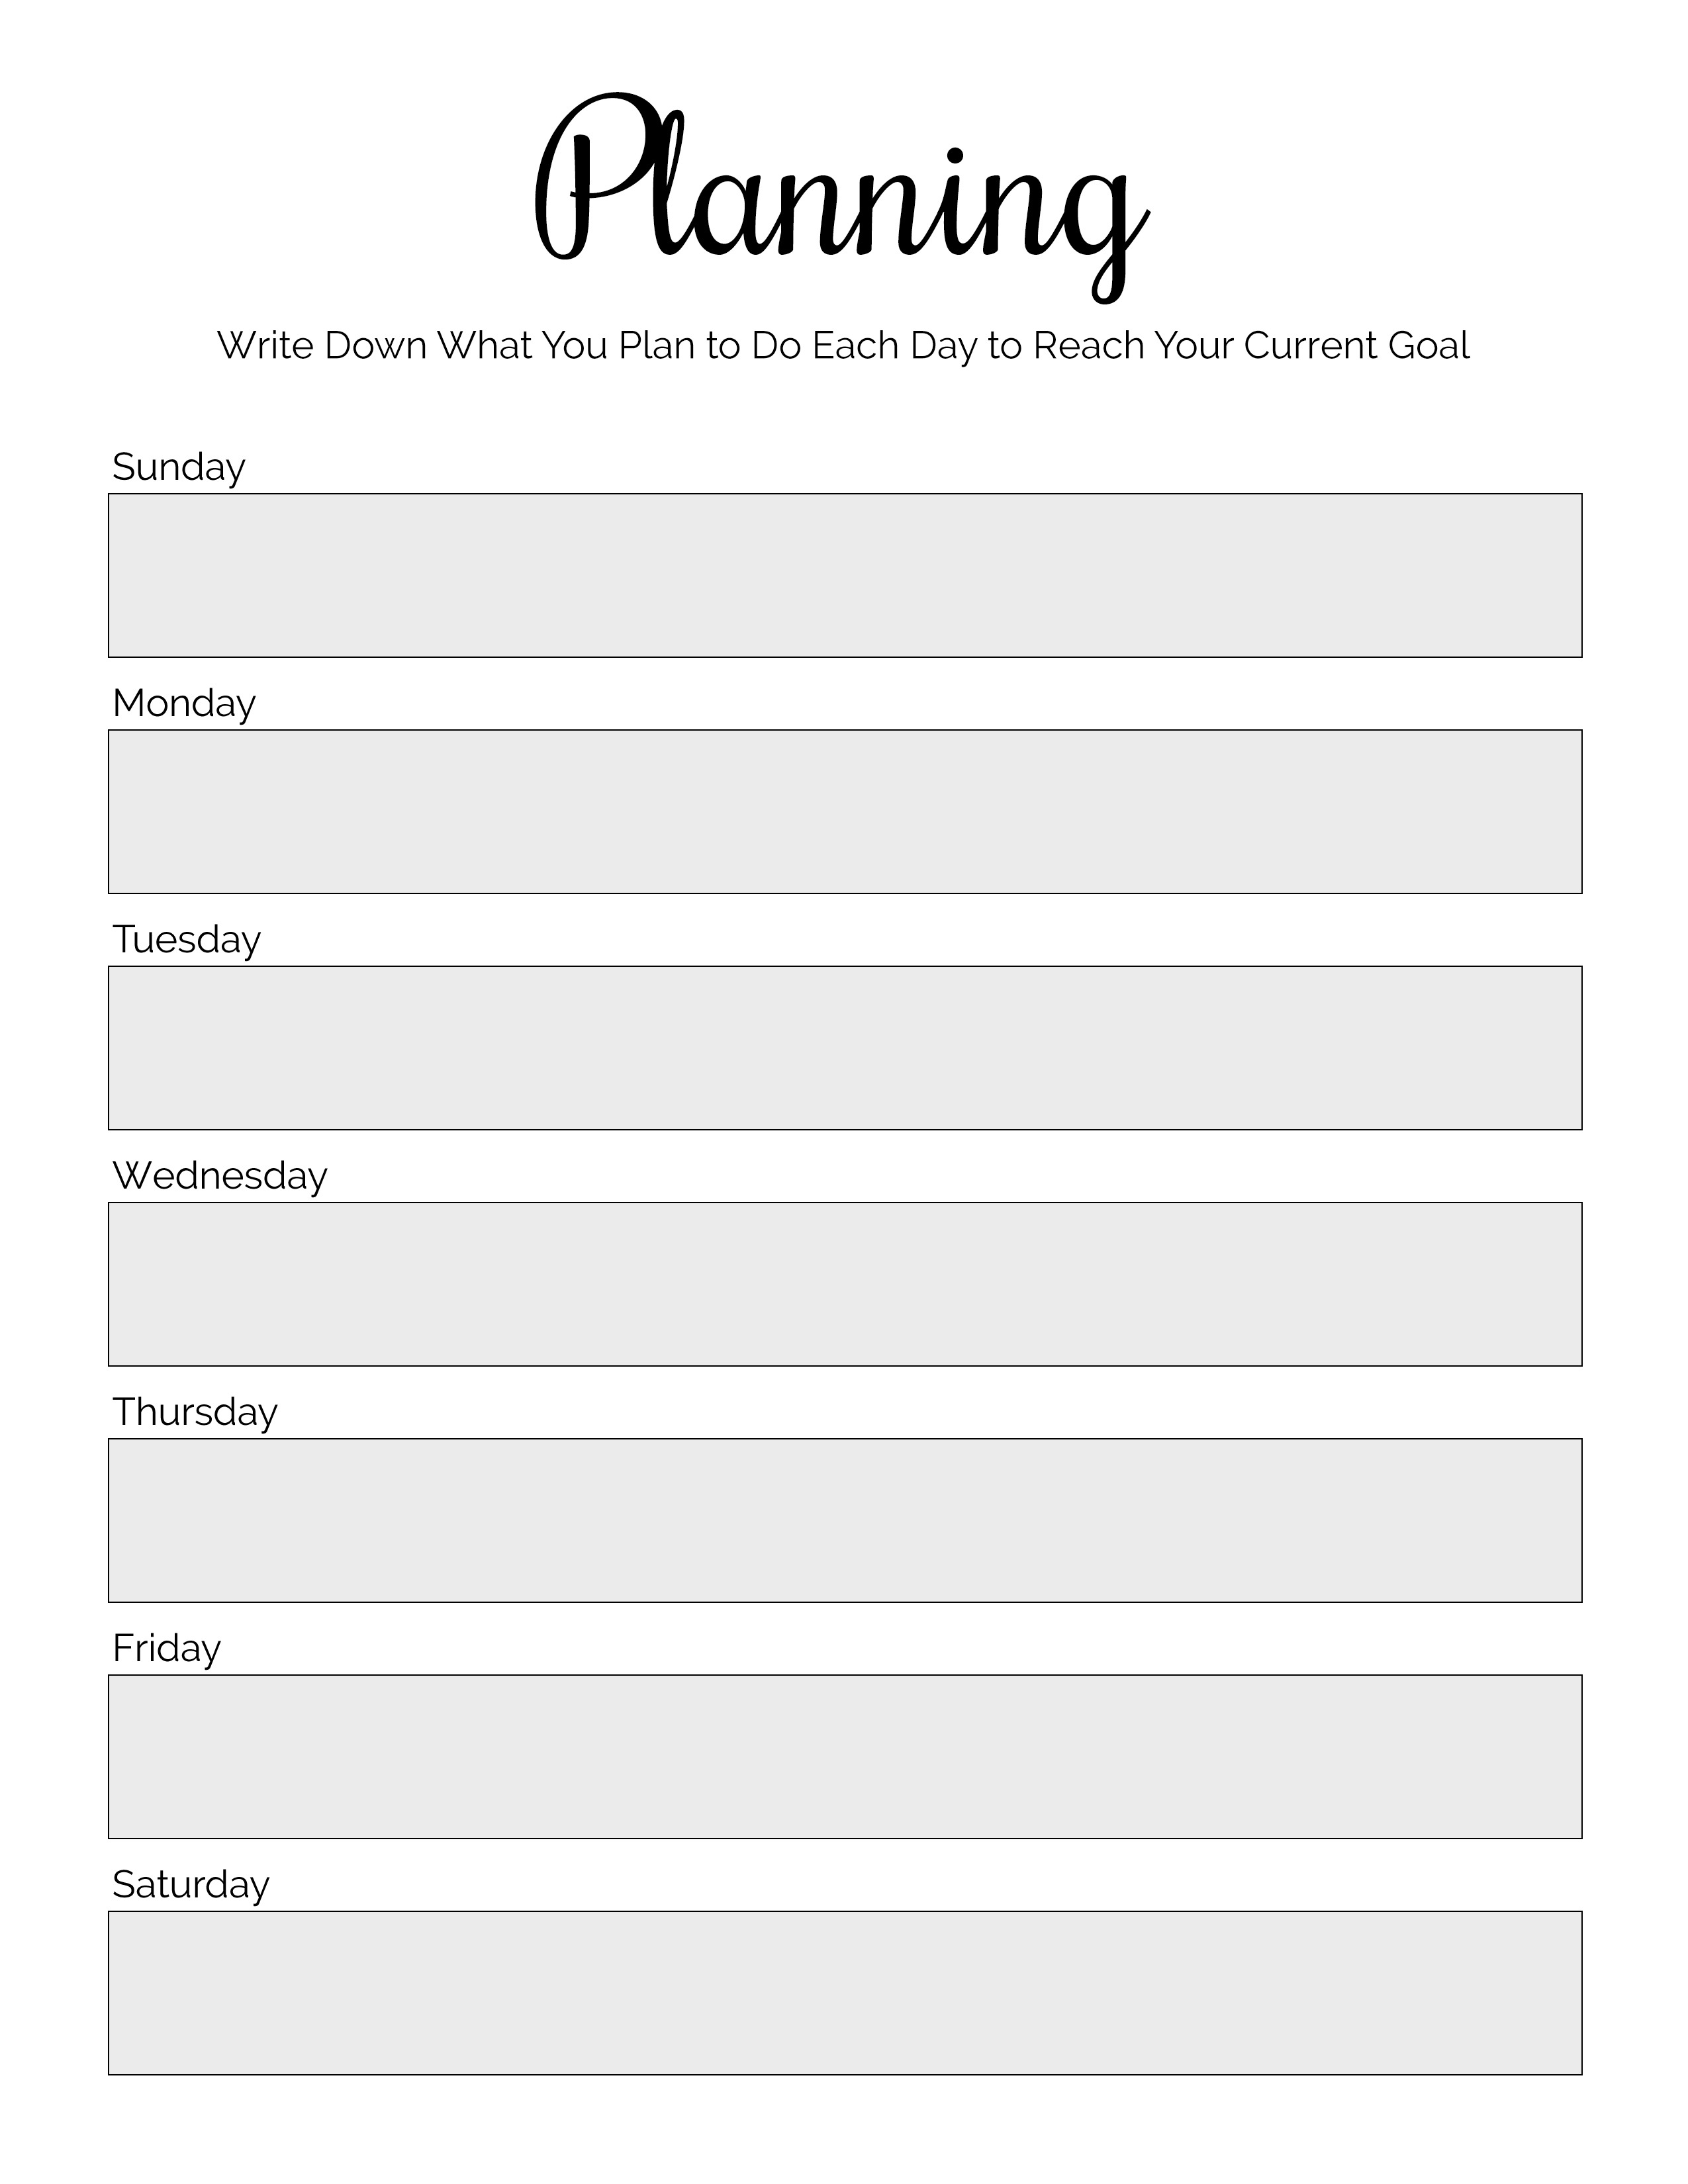 Planning Worksheet Preview